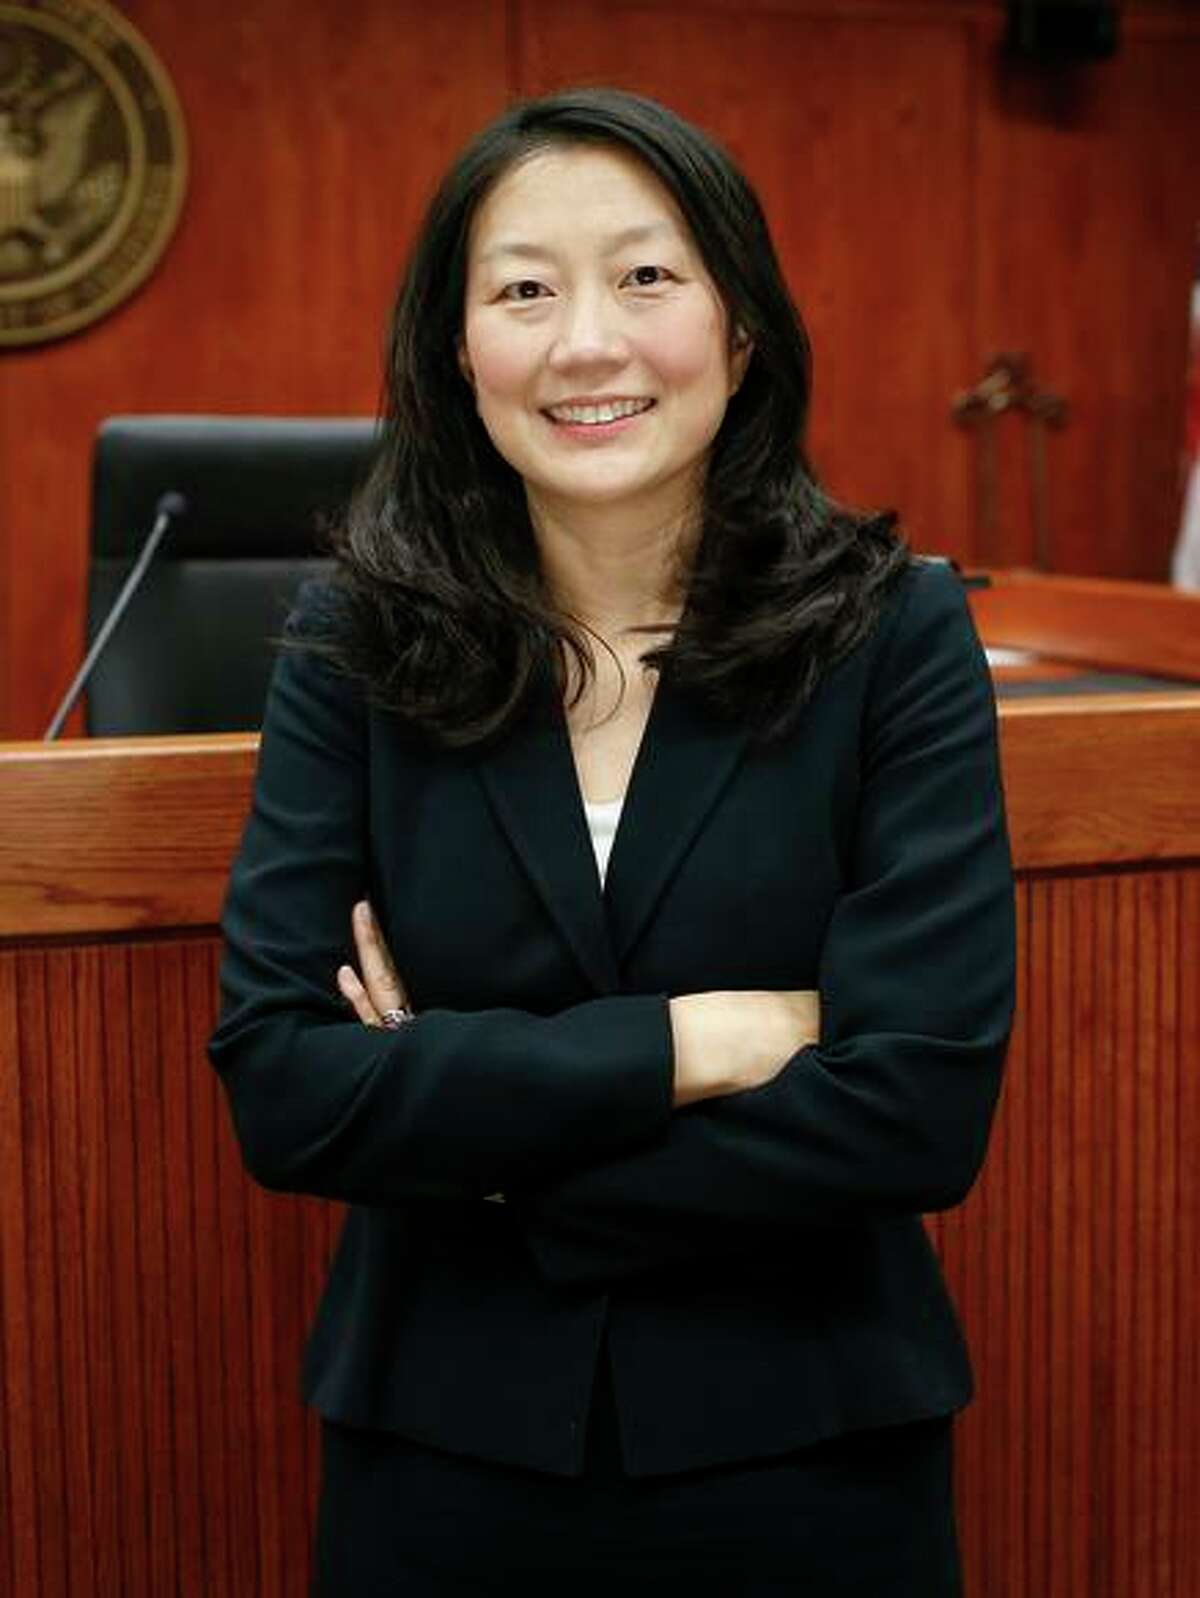 United States District Court Judge Lucy Koh has ordered the U.S. Census Bureau to keep counting through the end of October.